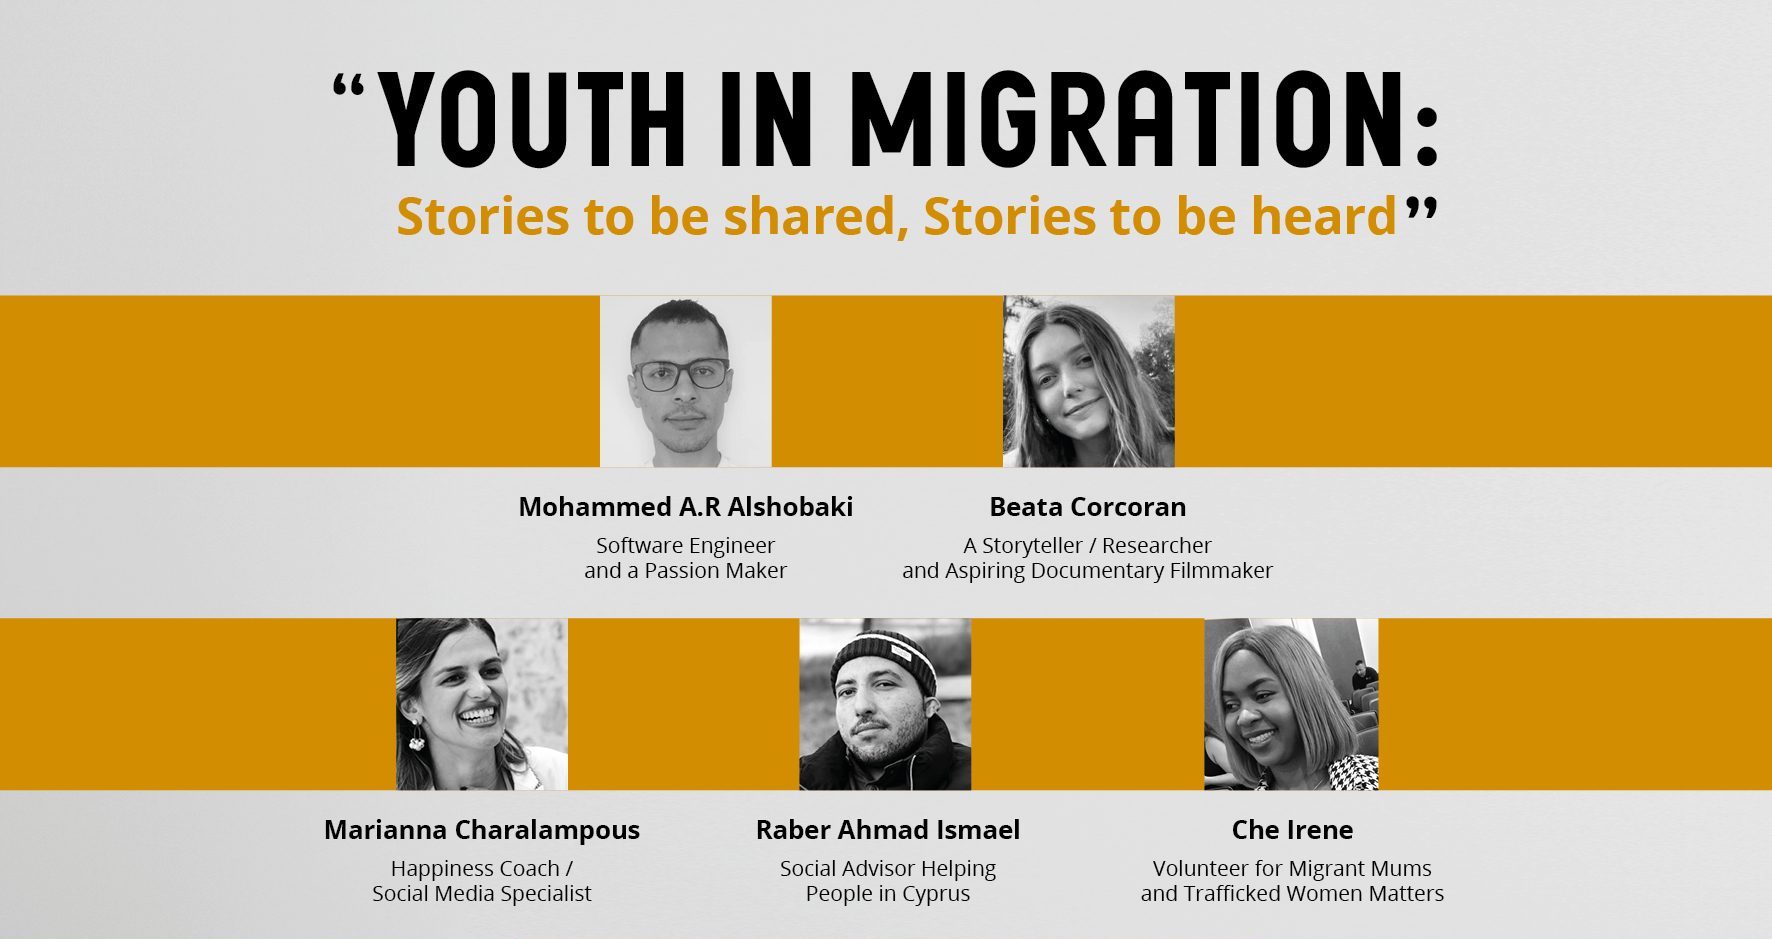 Youth in Migration: Stories to be shared, stories to be heard!